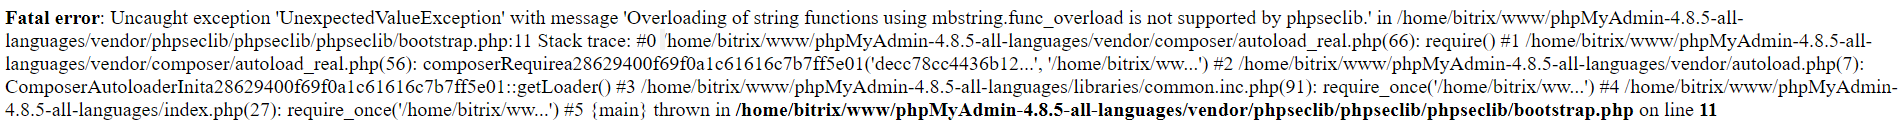 Ошибка установки phpMyAdmin - Uncaught exception 'UnexpectedValueException' with message 'Overloading of string functions using mbstring.func_overload is not supported by phpseclib